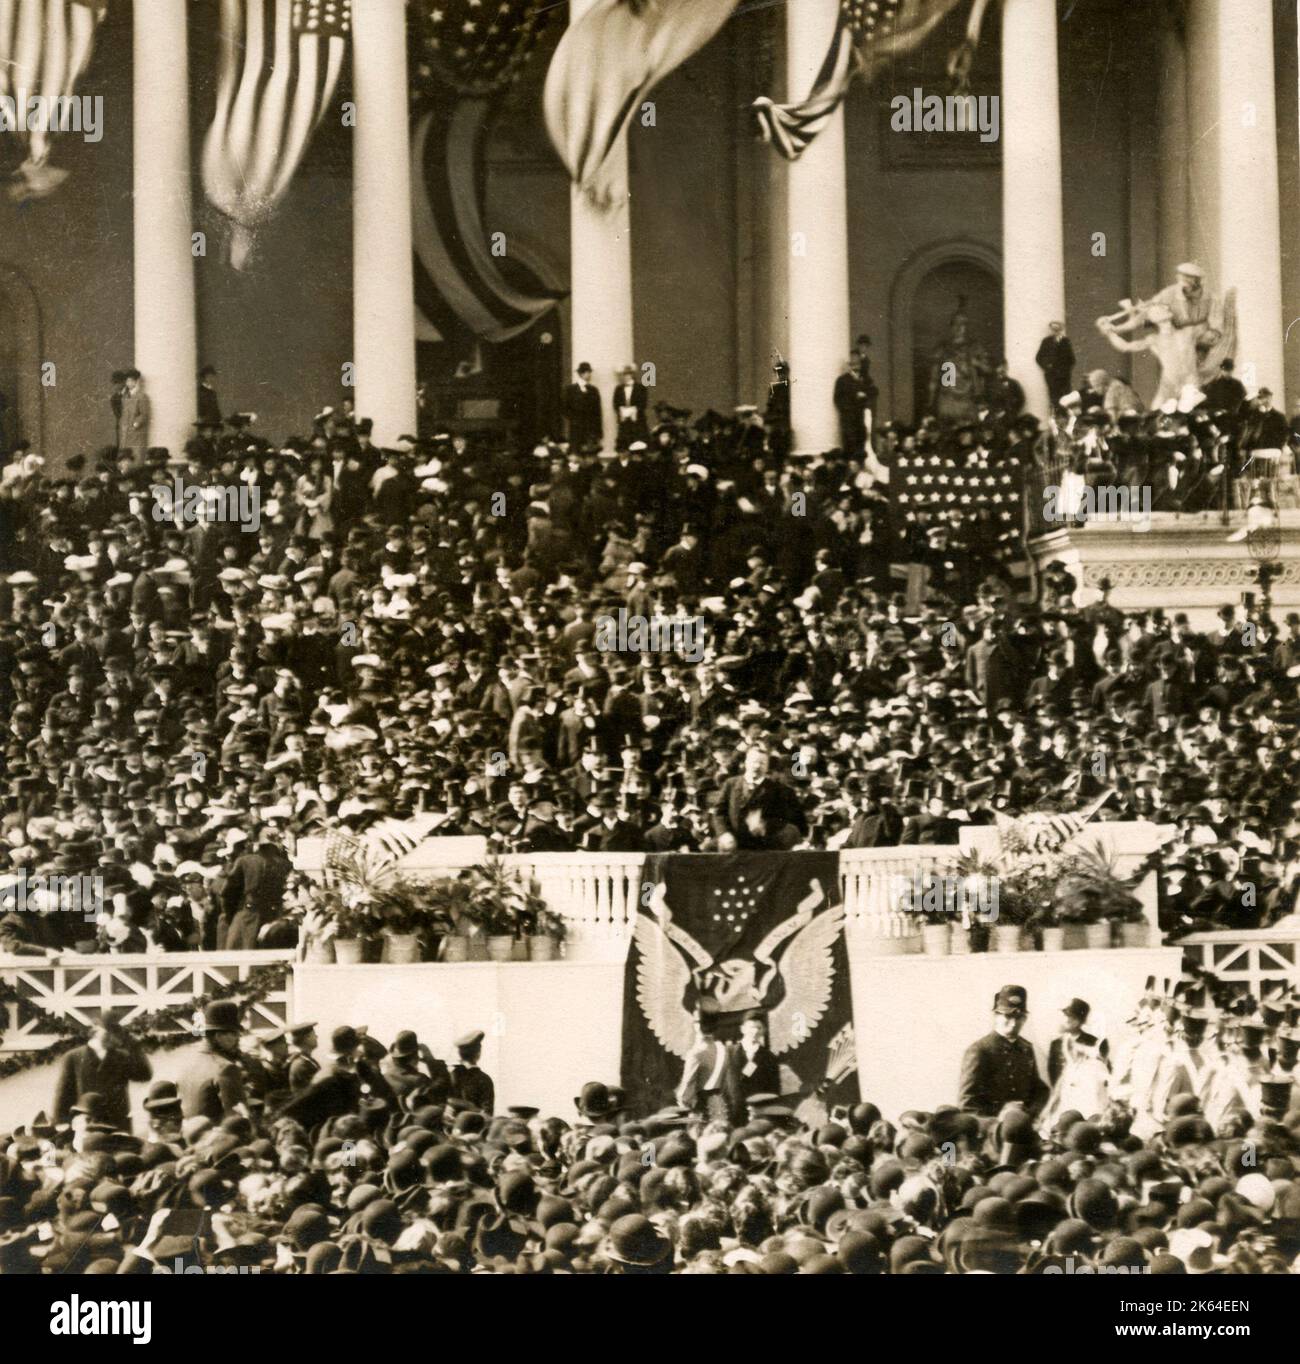 The second inauguration of Theodore Roosevelt as President of the United States, took place on Saturday, March 4, 1905 Stock Photo